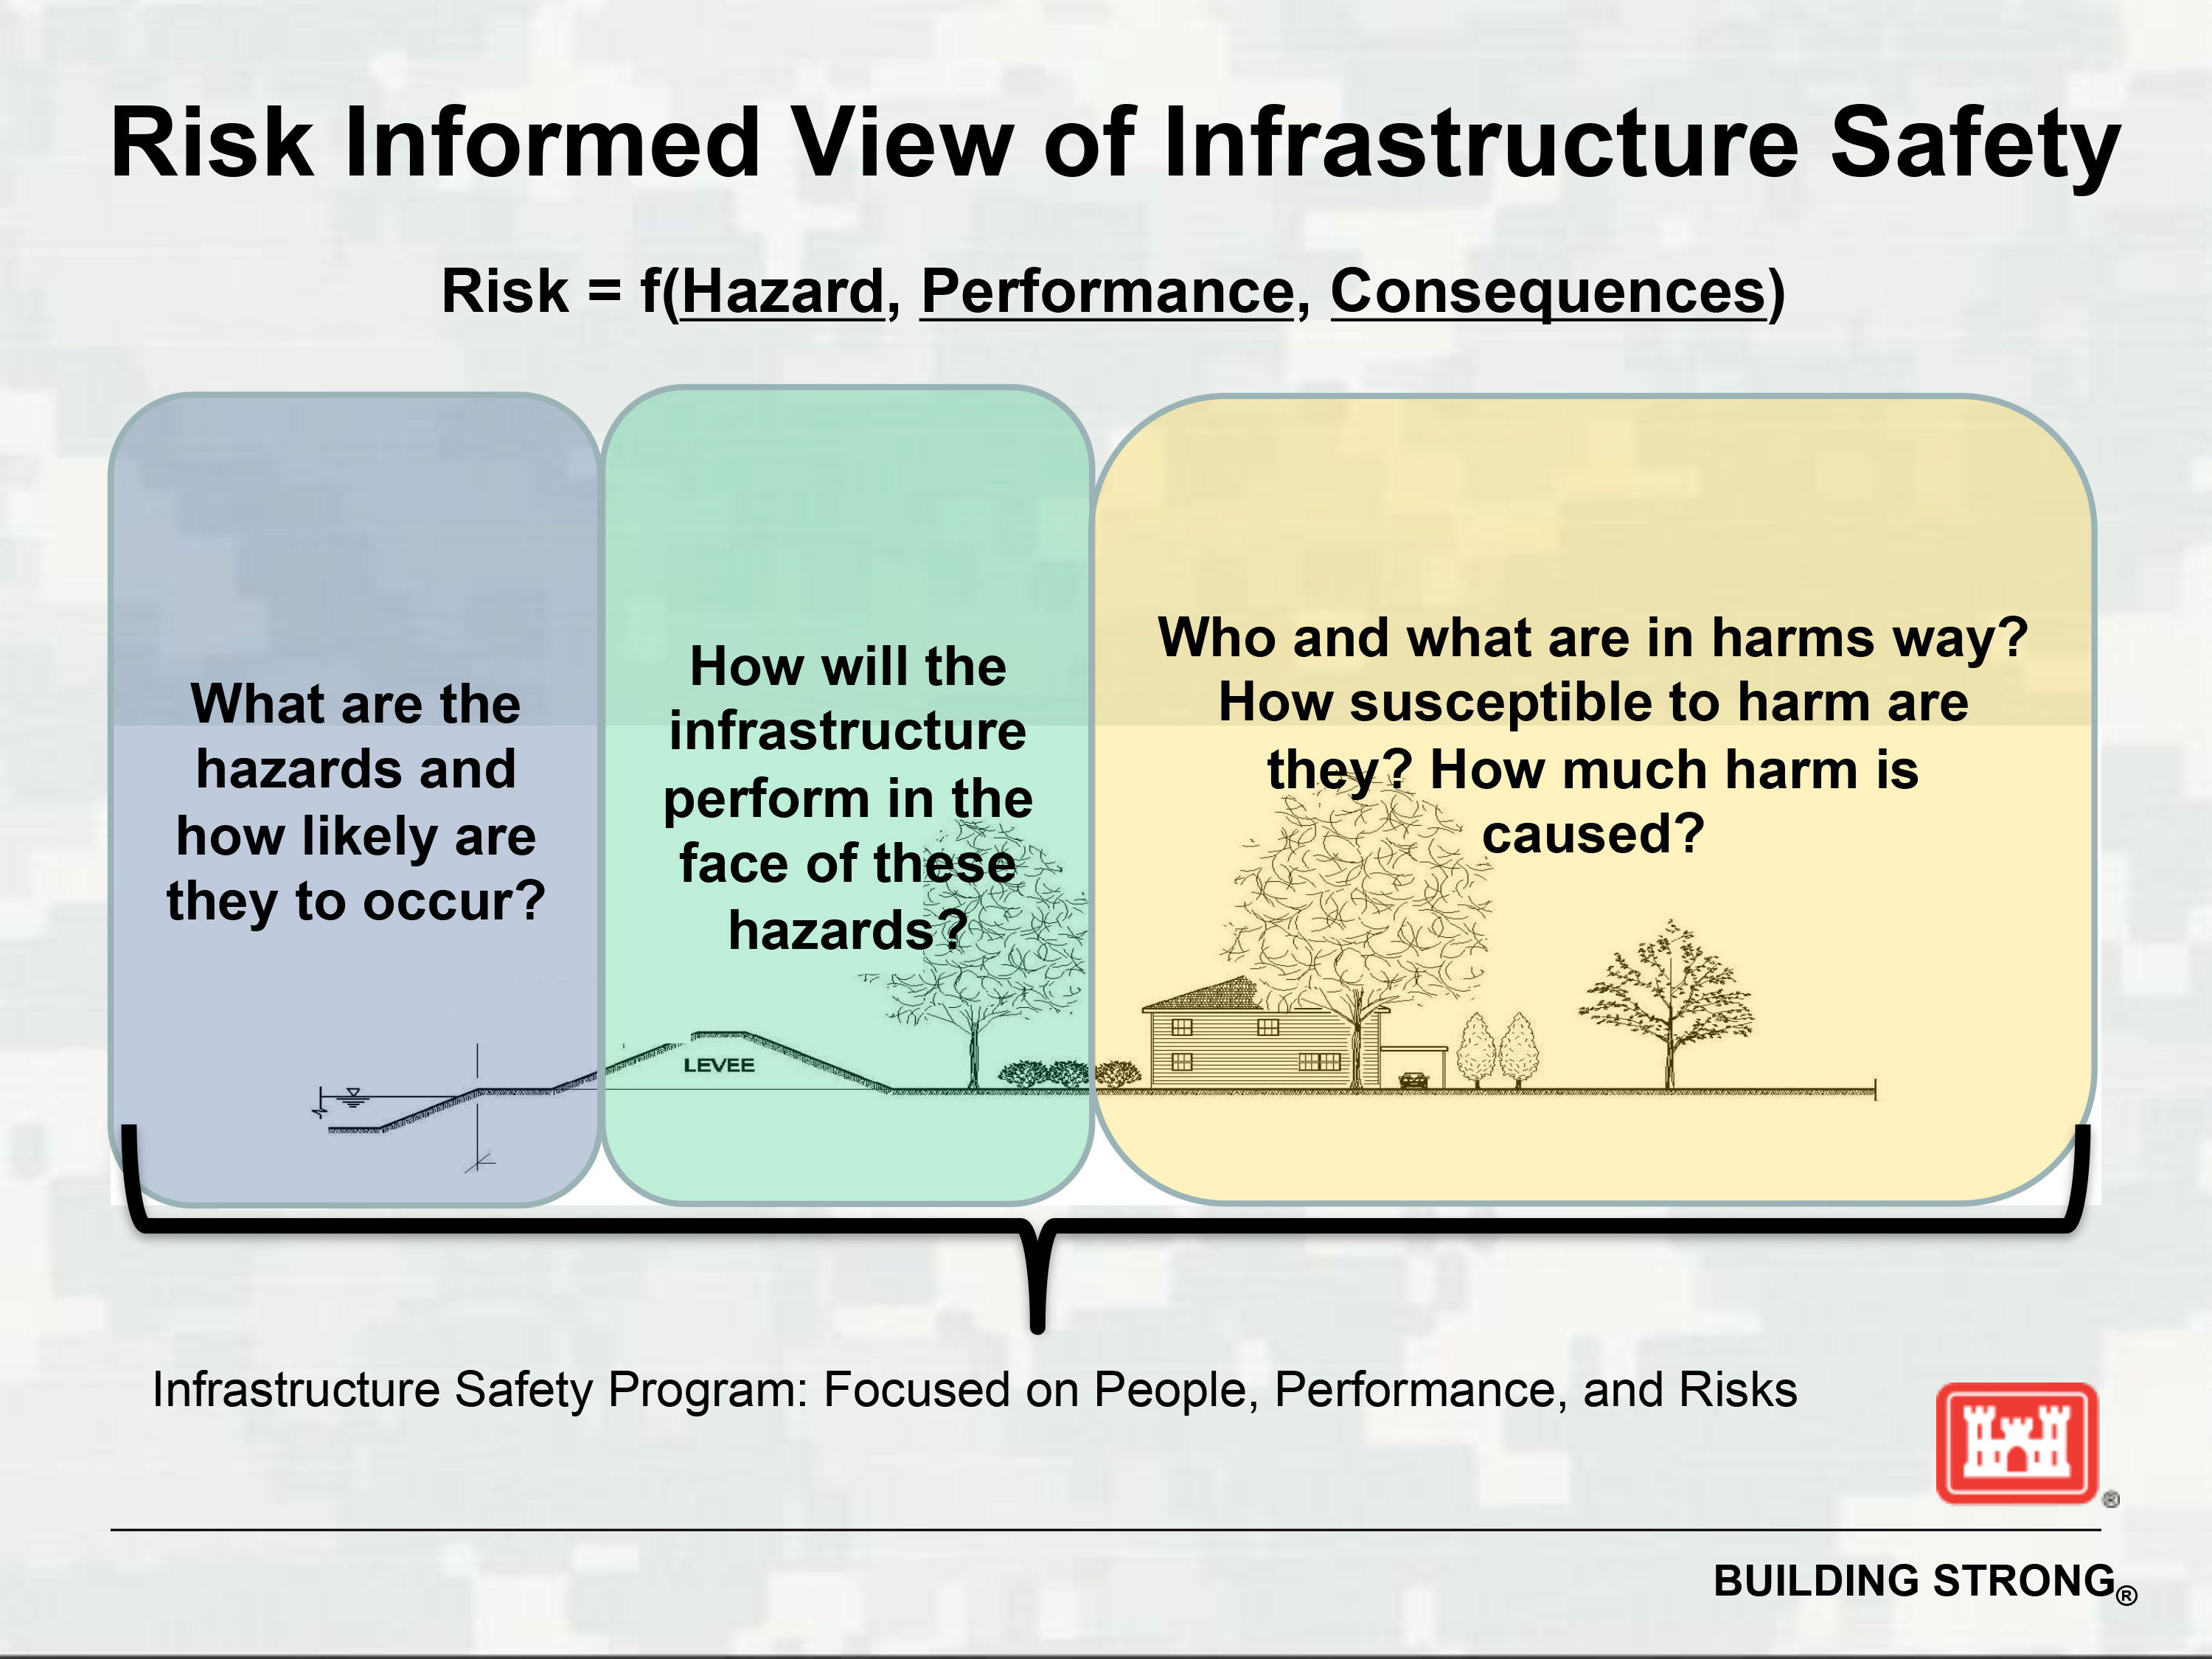 Risk-informed view of infrastructure safety